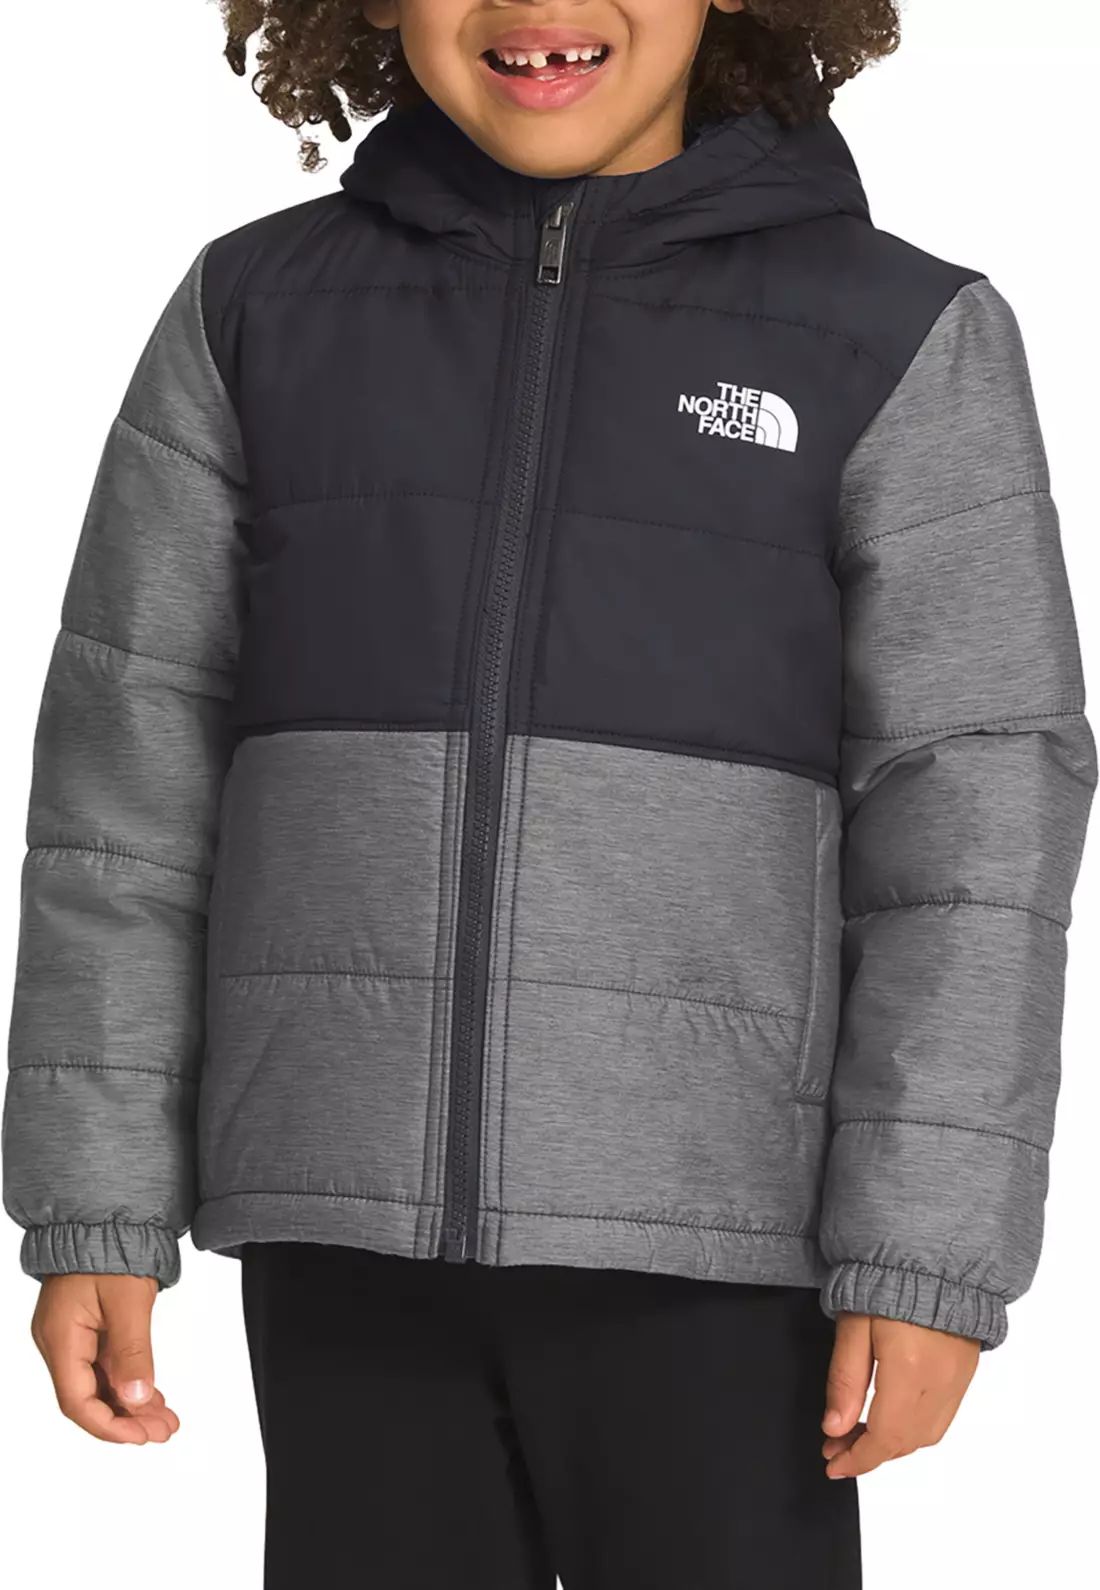 The North Face Toddler Reversible Mount Chimbo Full Zip Hooded Jacket | Dick's Sporting Goods